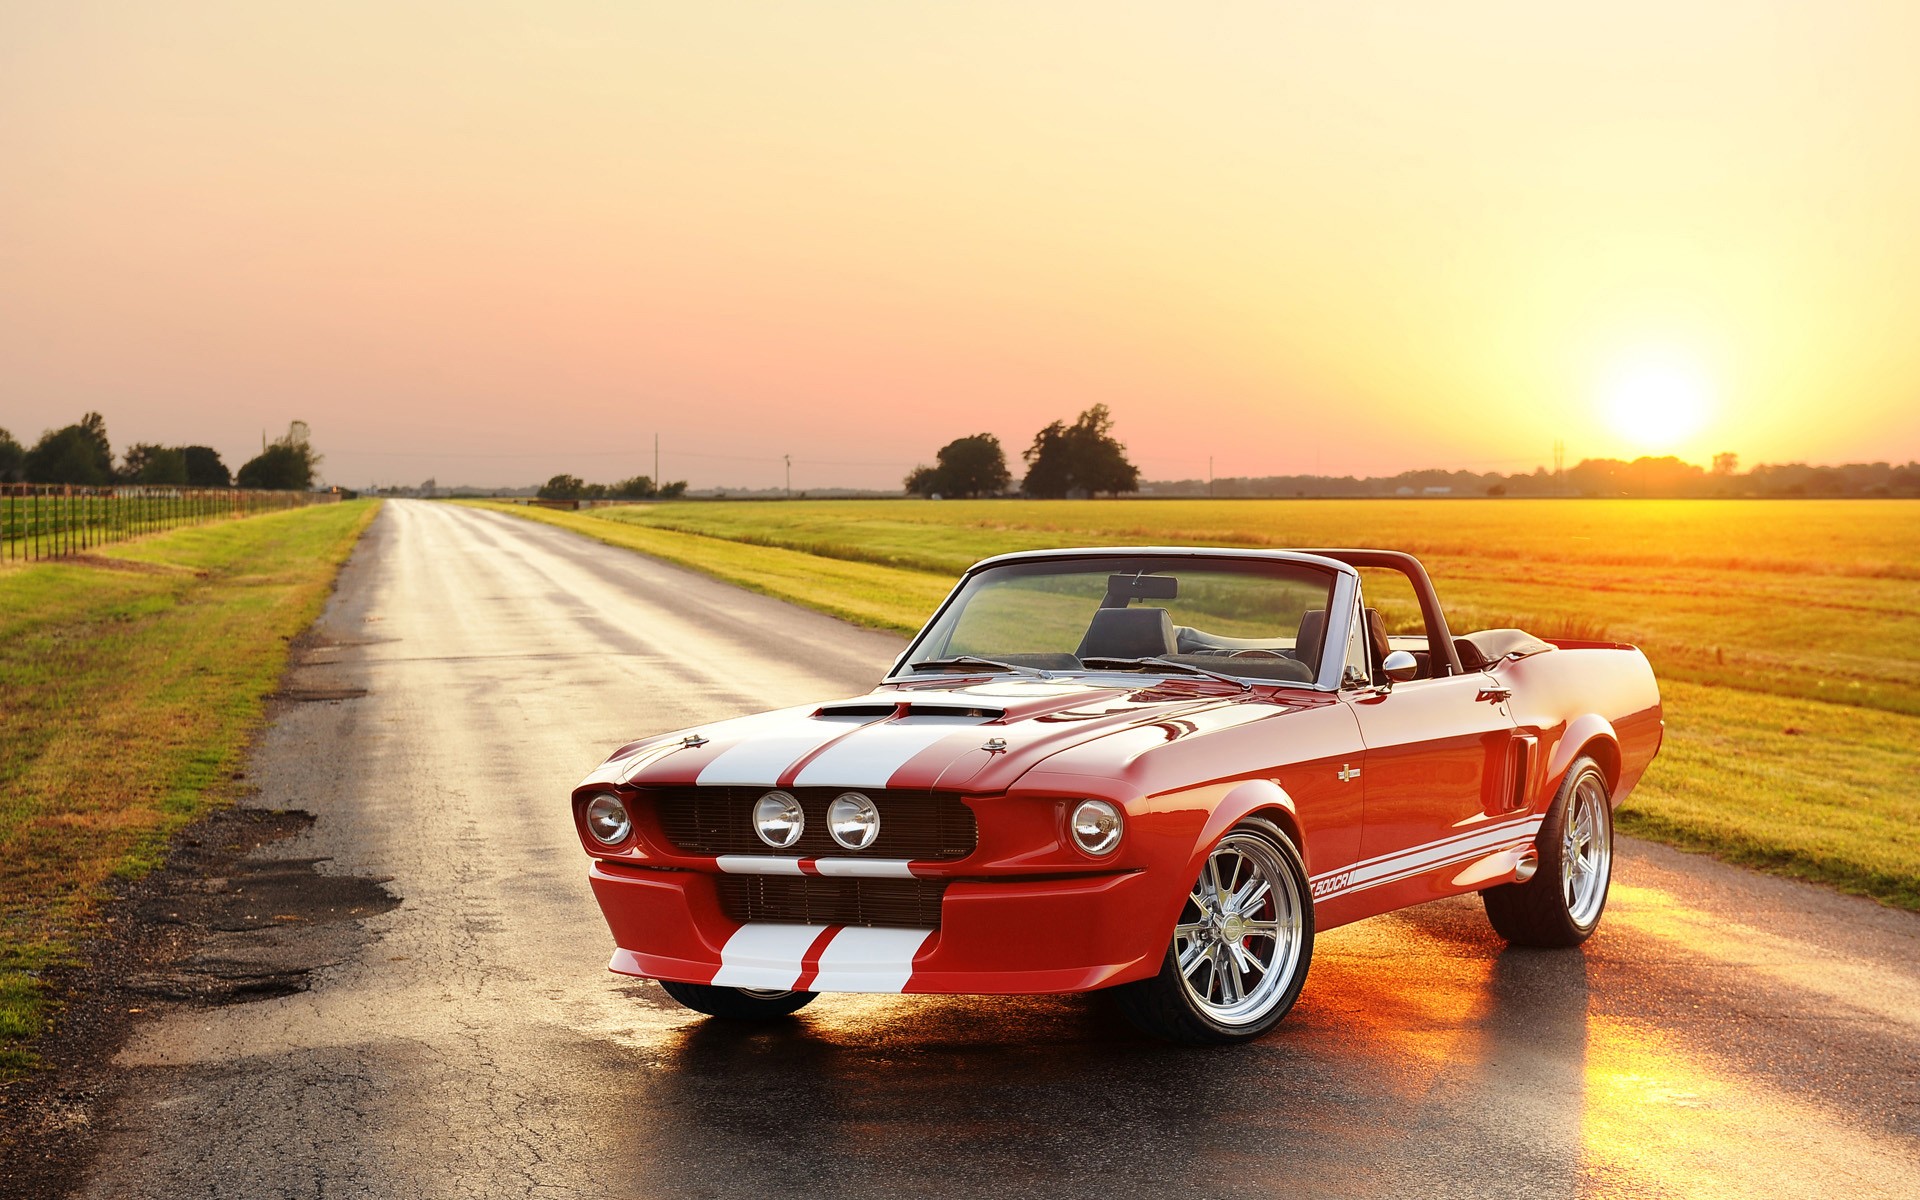 Cars HD Wallpapers 2015 1920x1200